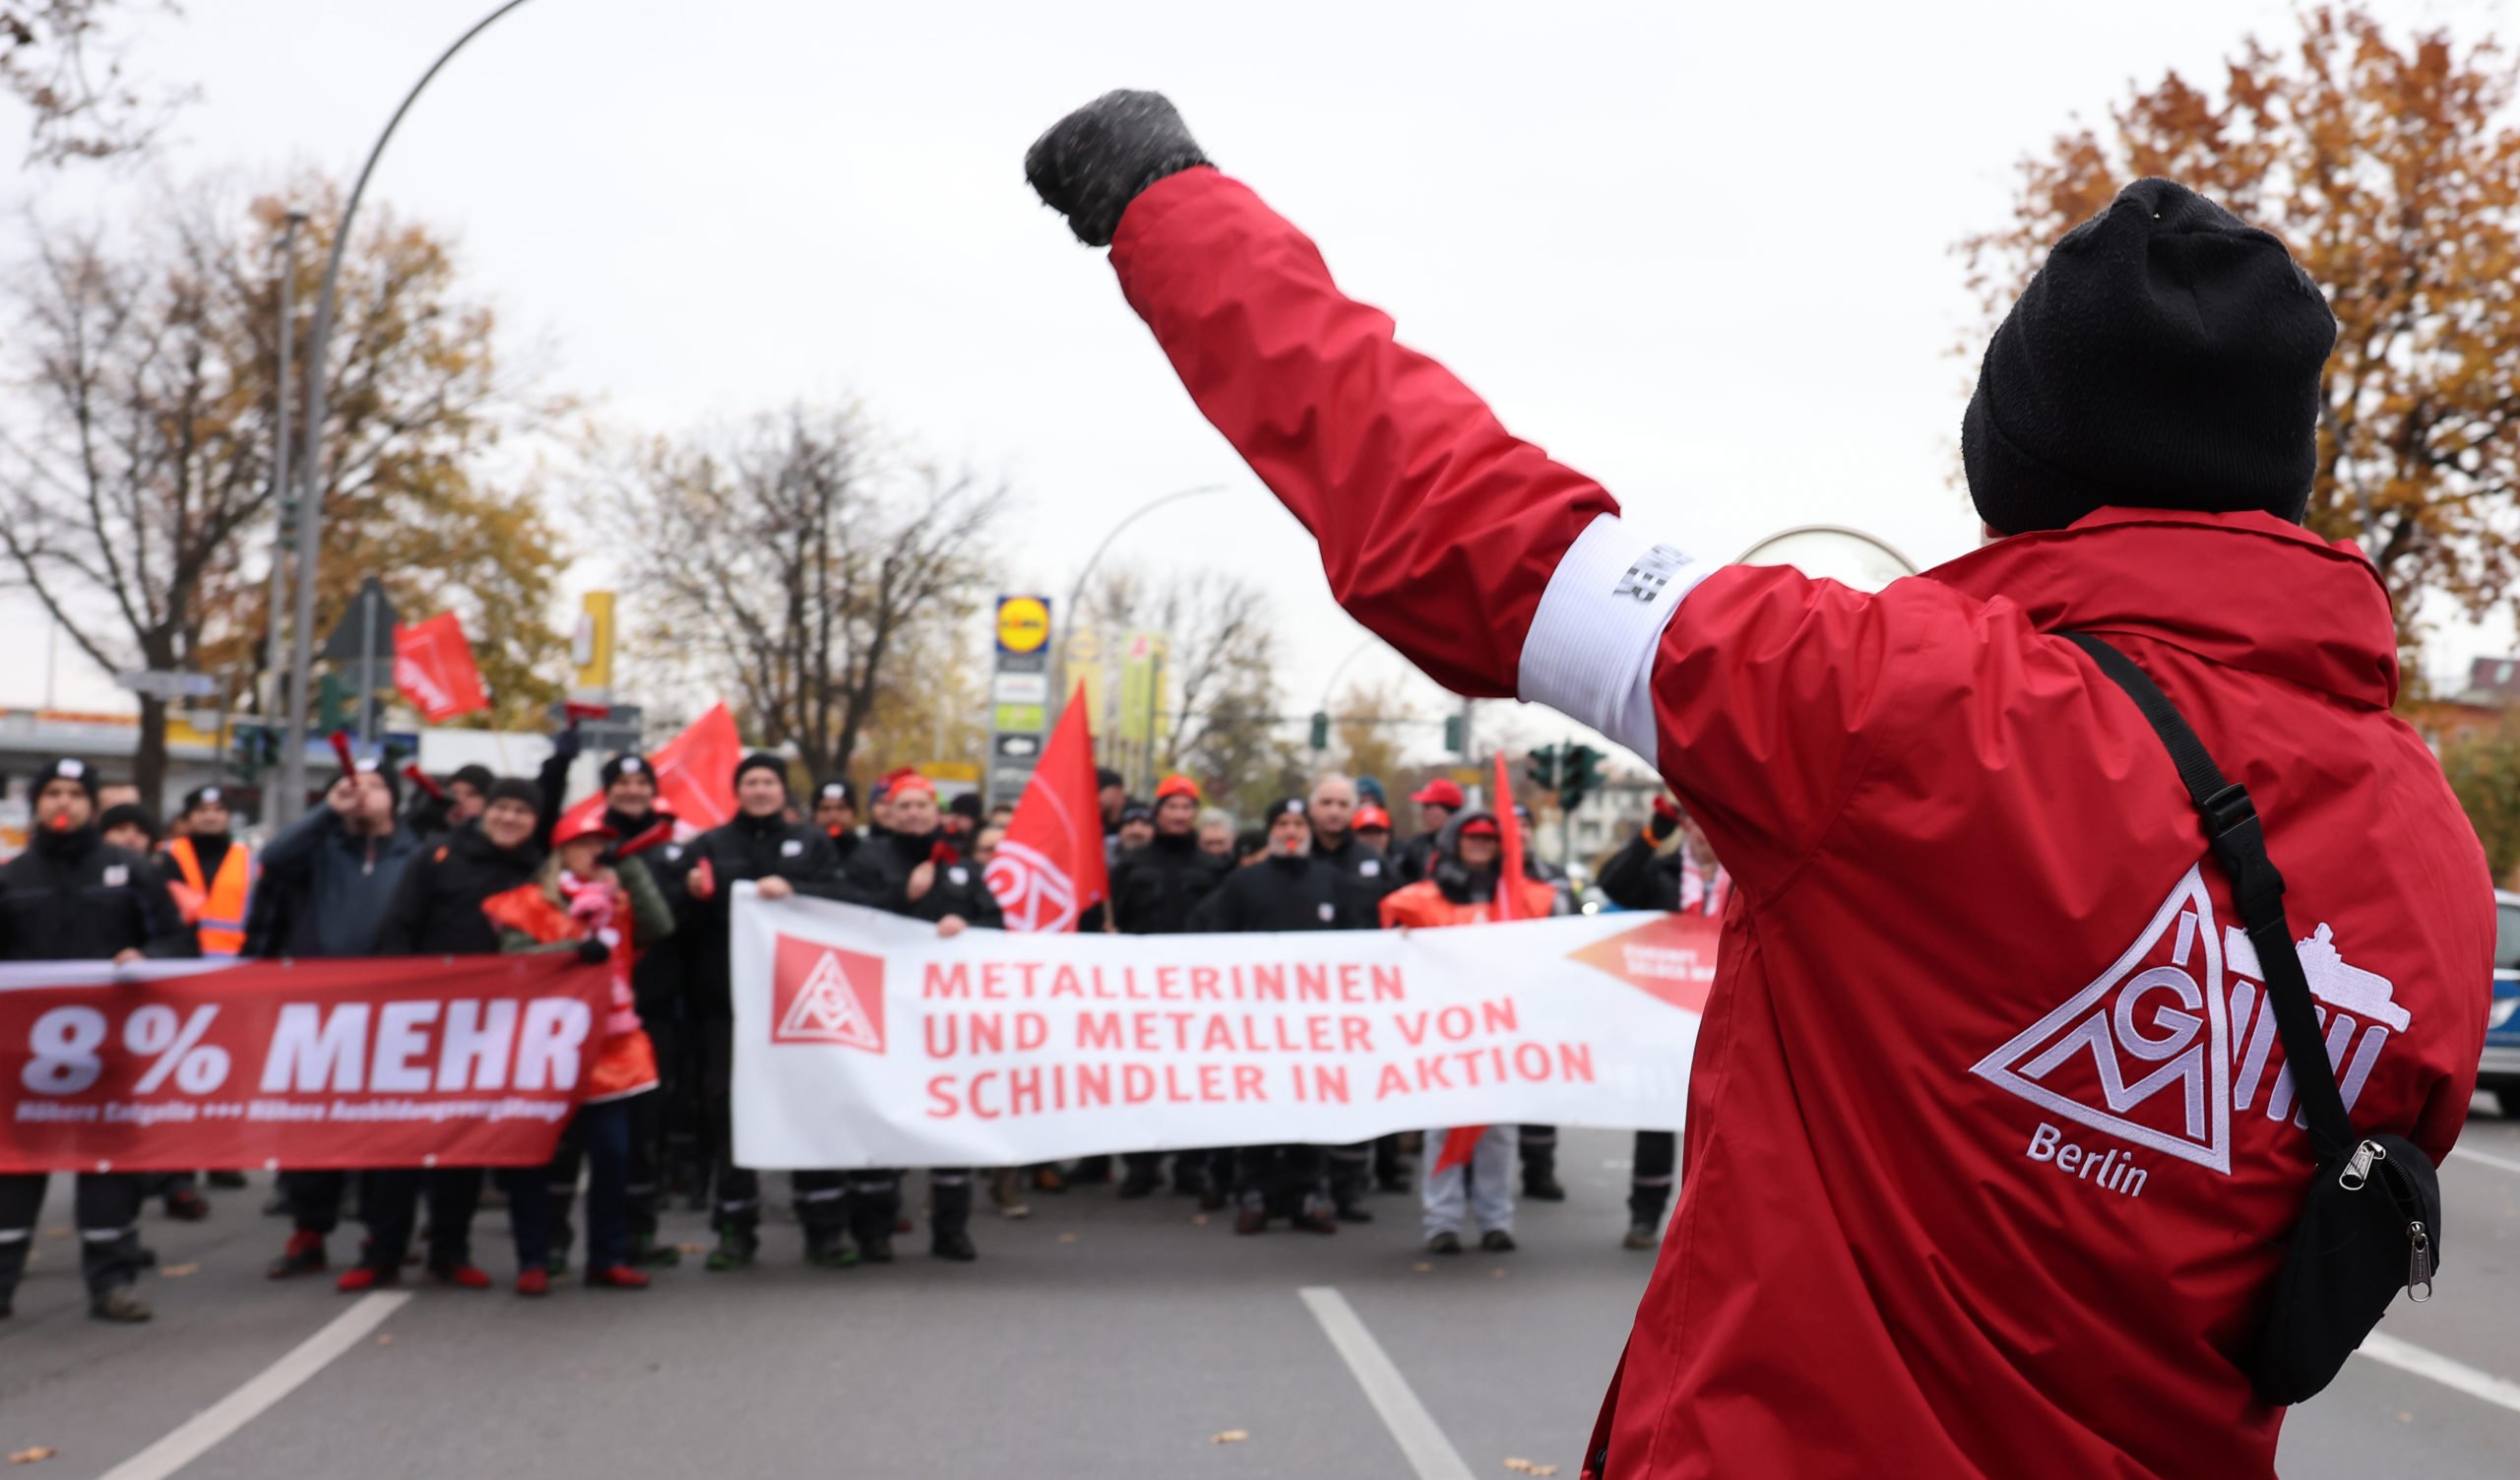 A warning strike by IG Metall employees taking place in Berlin on November 17th.